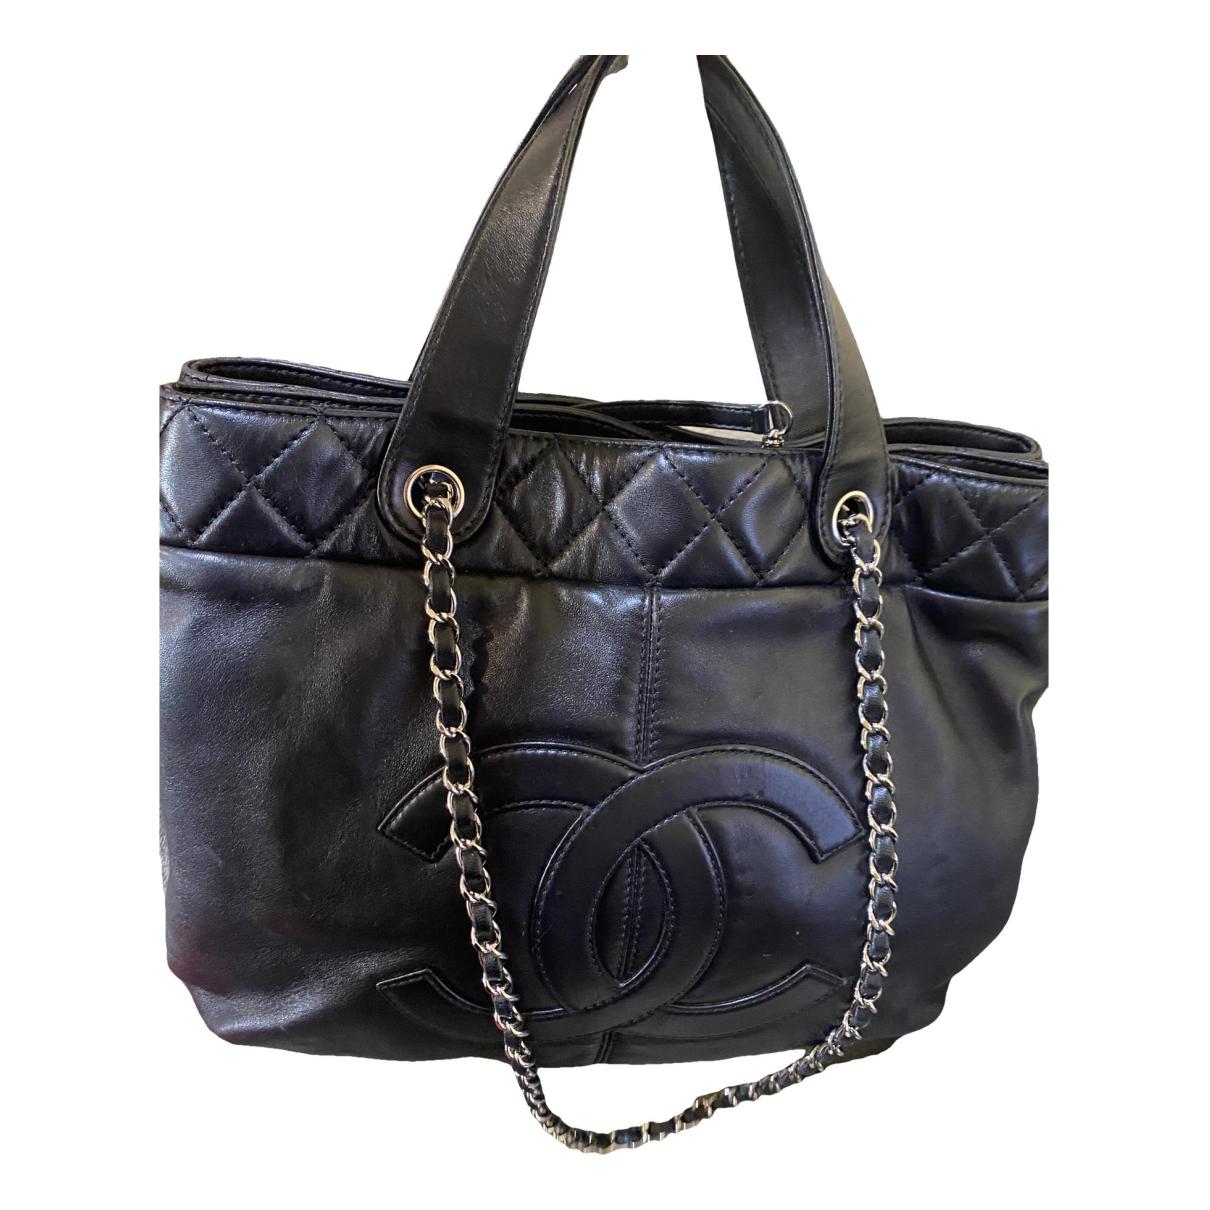 Timeless/classique leather tote Chanel Black in Leather - 27699646